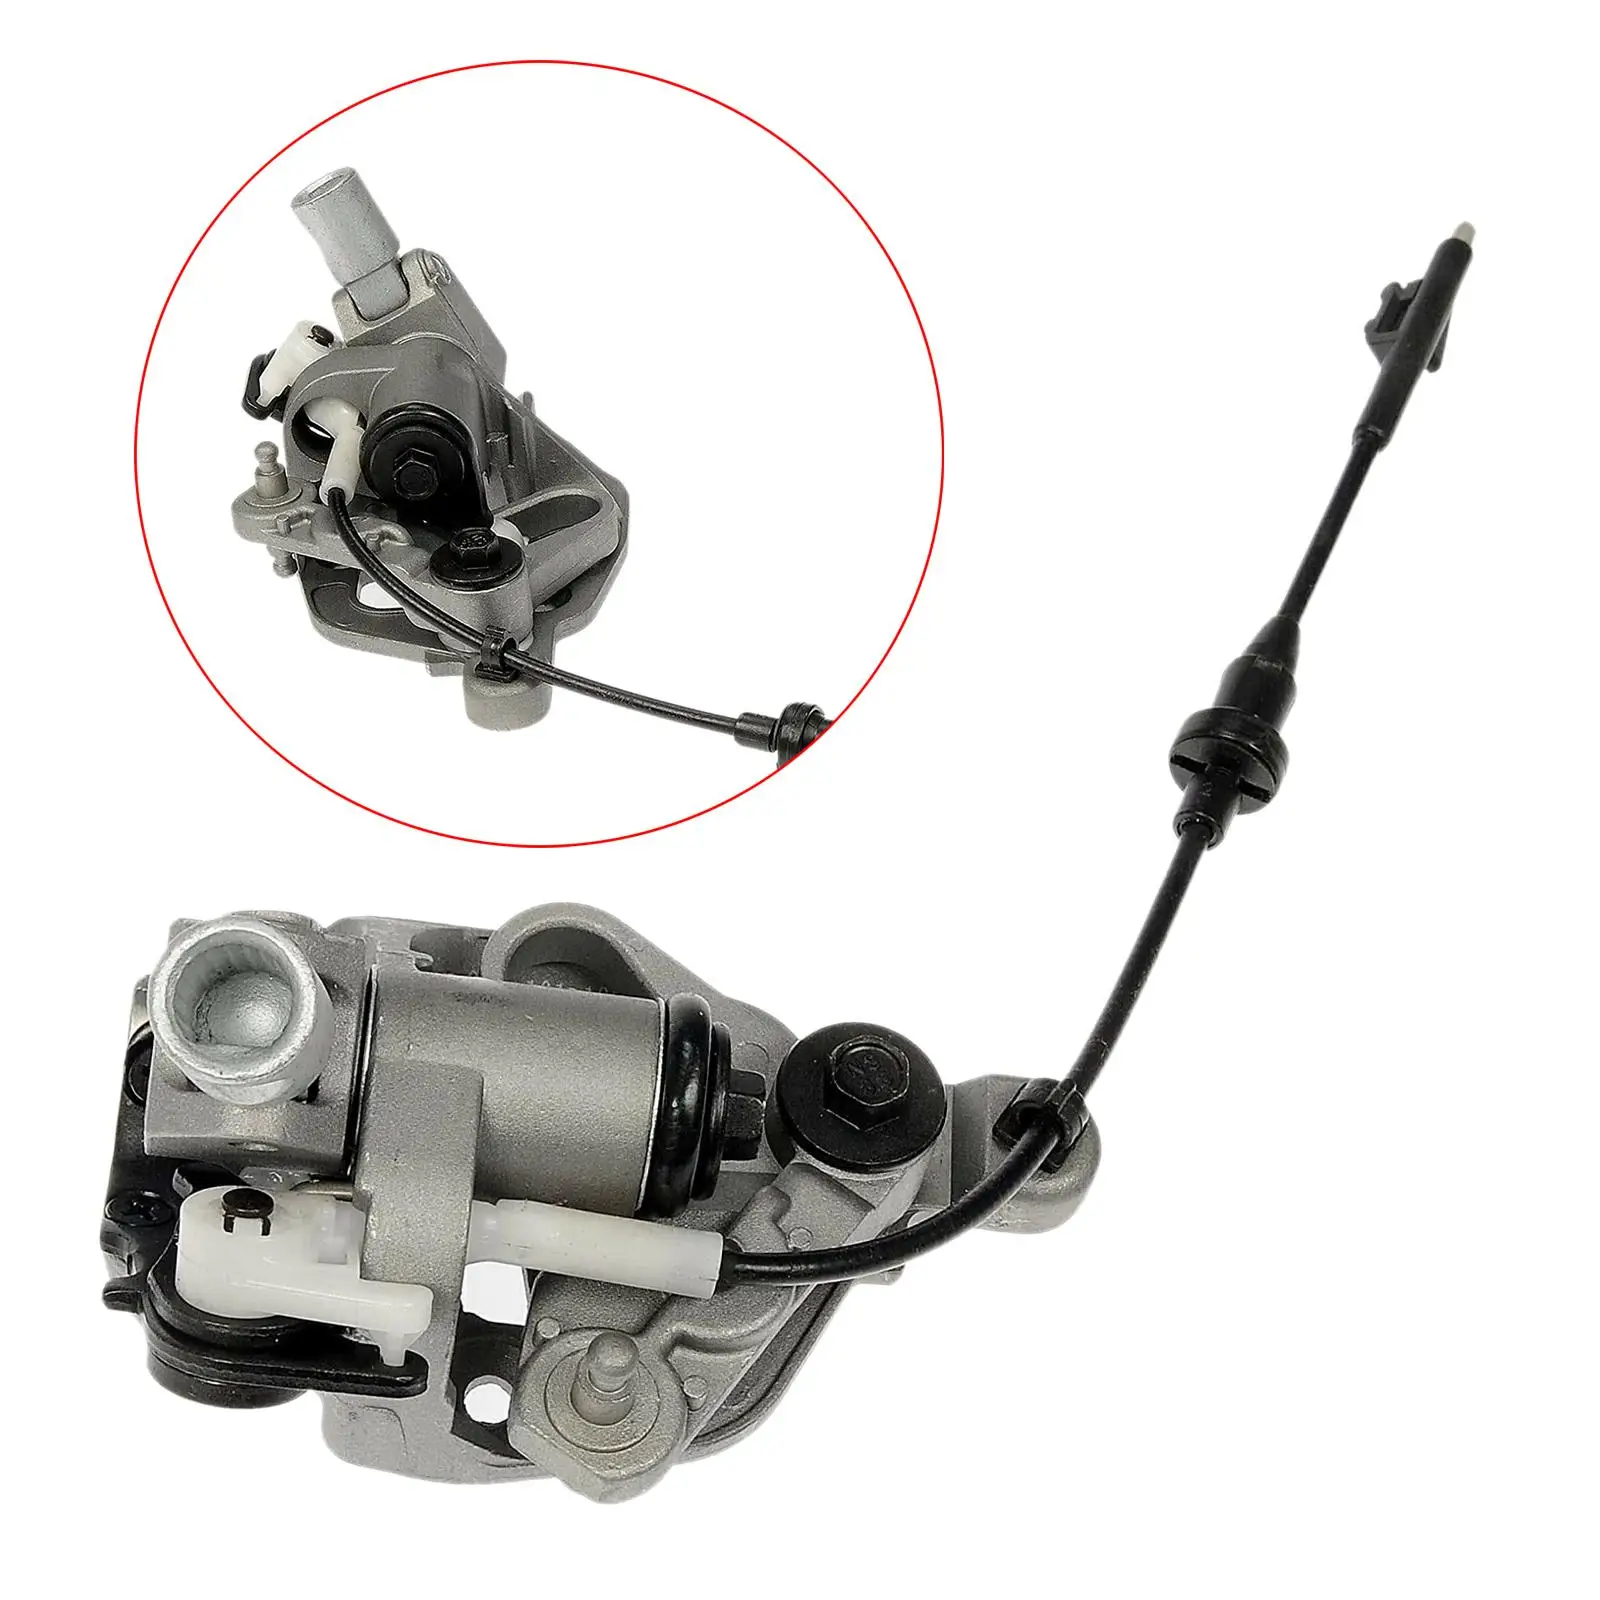 Steering Column Shift Control Mechanism 26091246 905-101 Repair Parts Direct Replaces Spare Parts Auto Accessory for Yukon